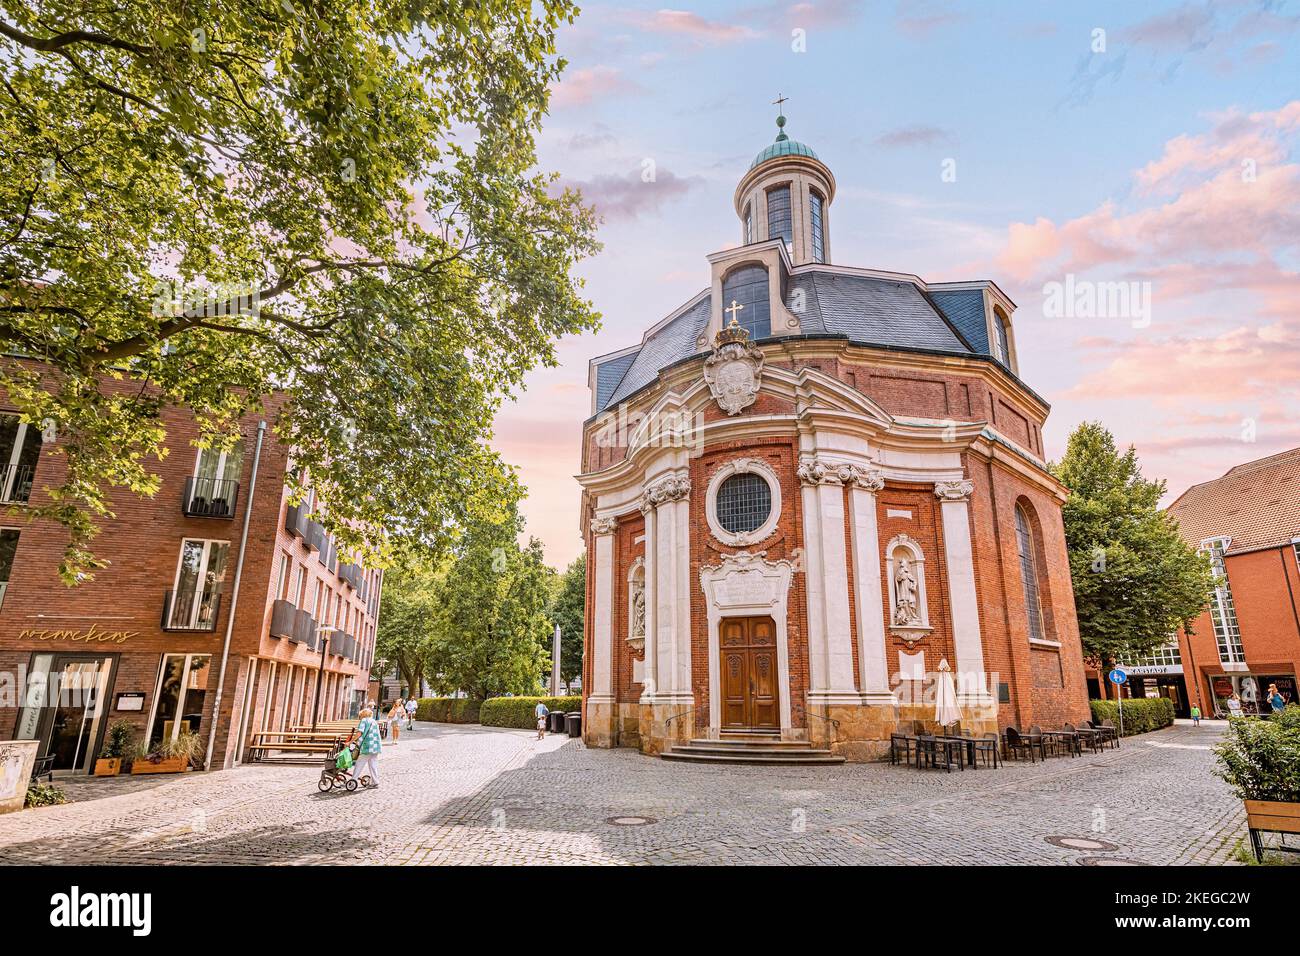 25 July 2022, Munster, Germany: Famous Clemenskirche or Clemens Church in Muenster city. Sightseeing and religious tourism landmarks Stock Photo